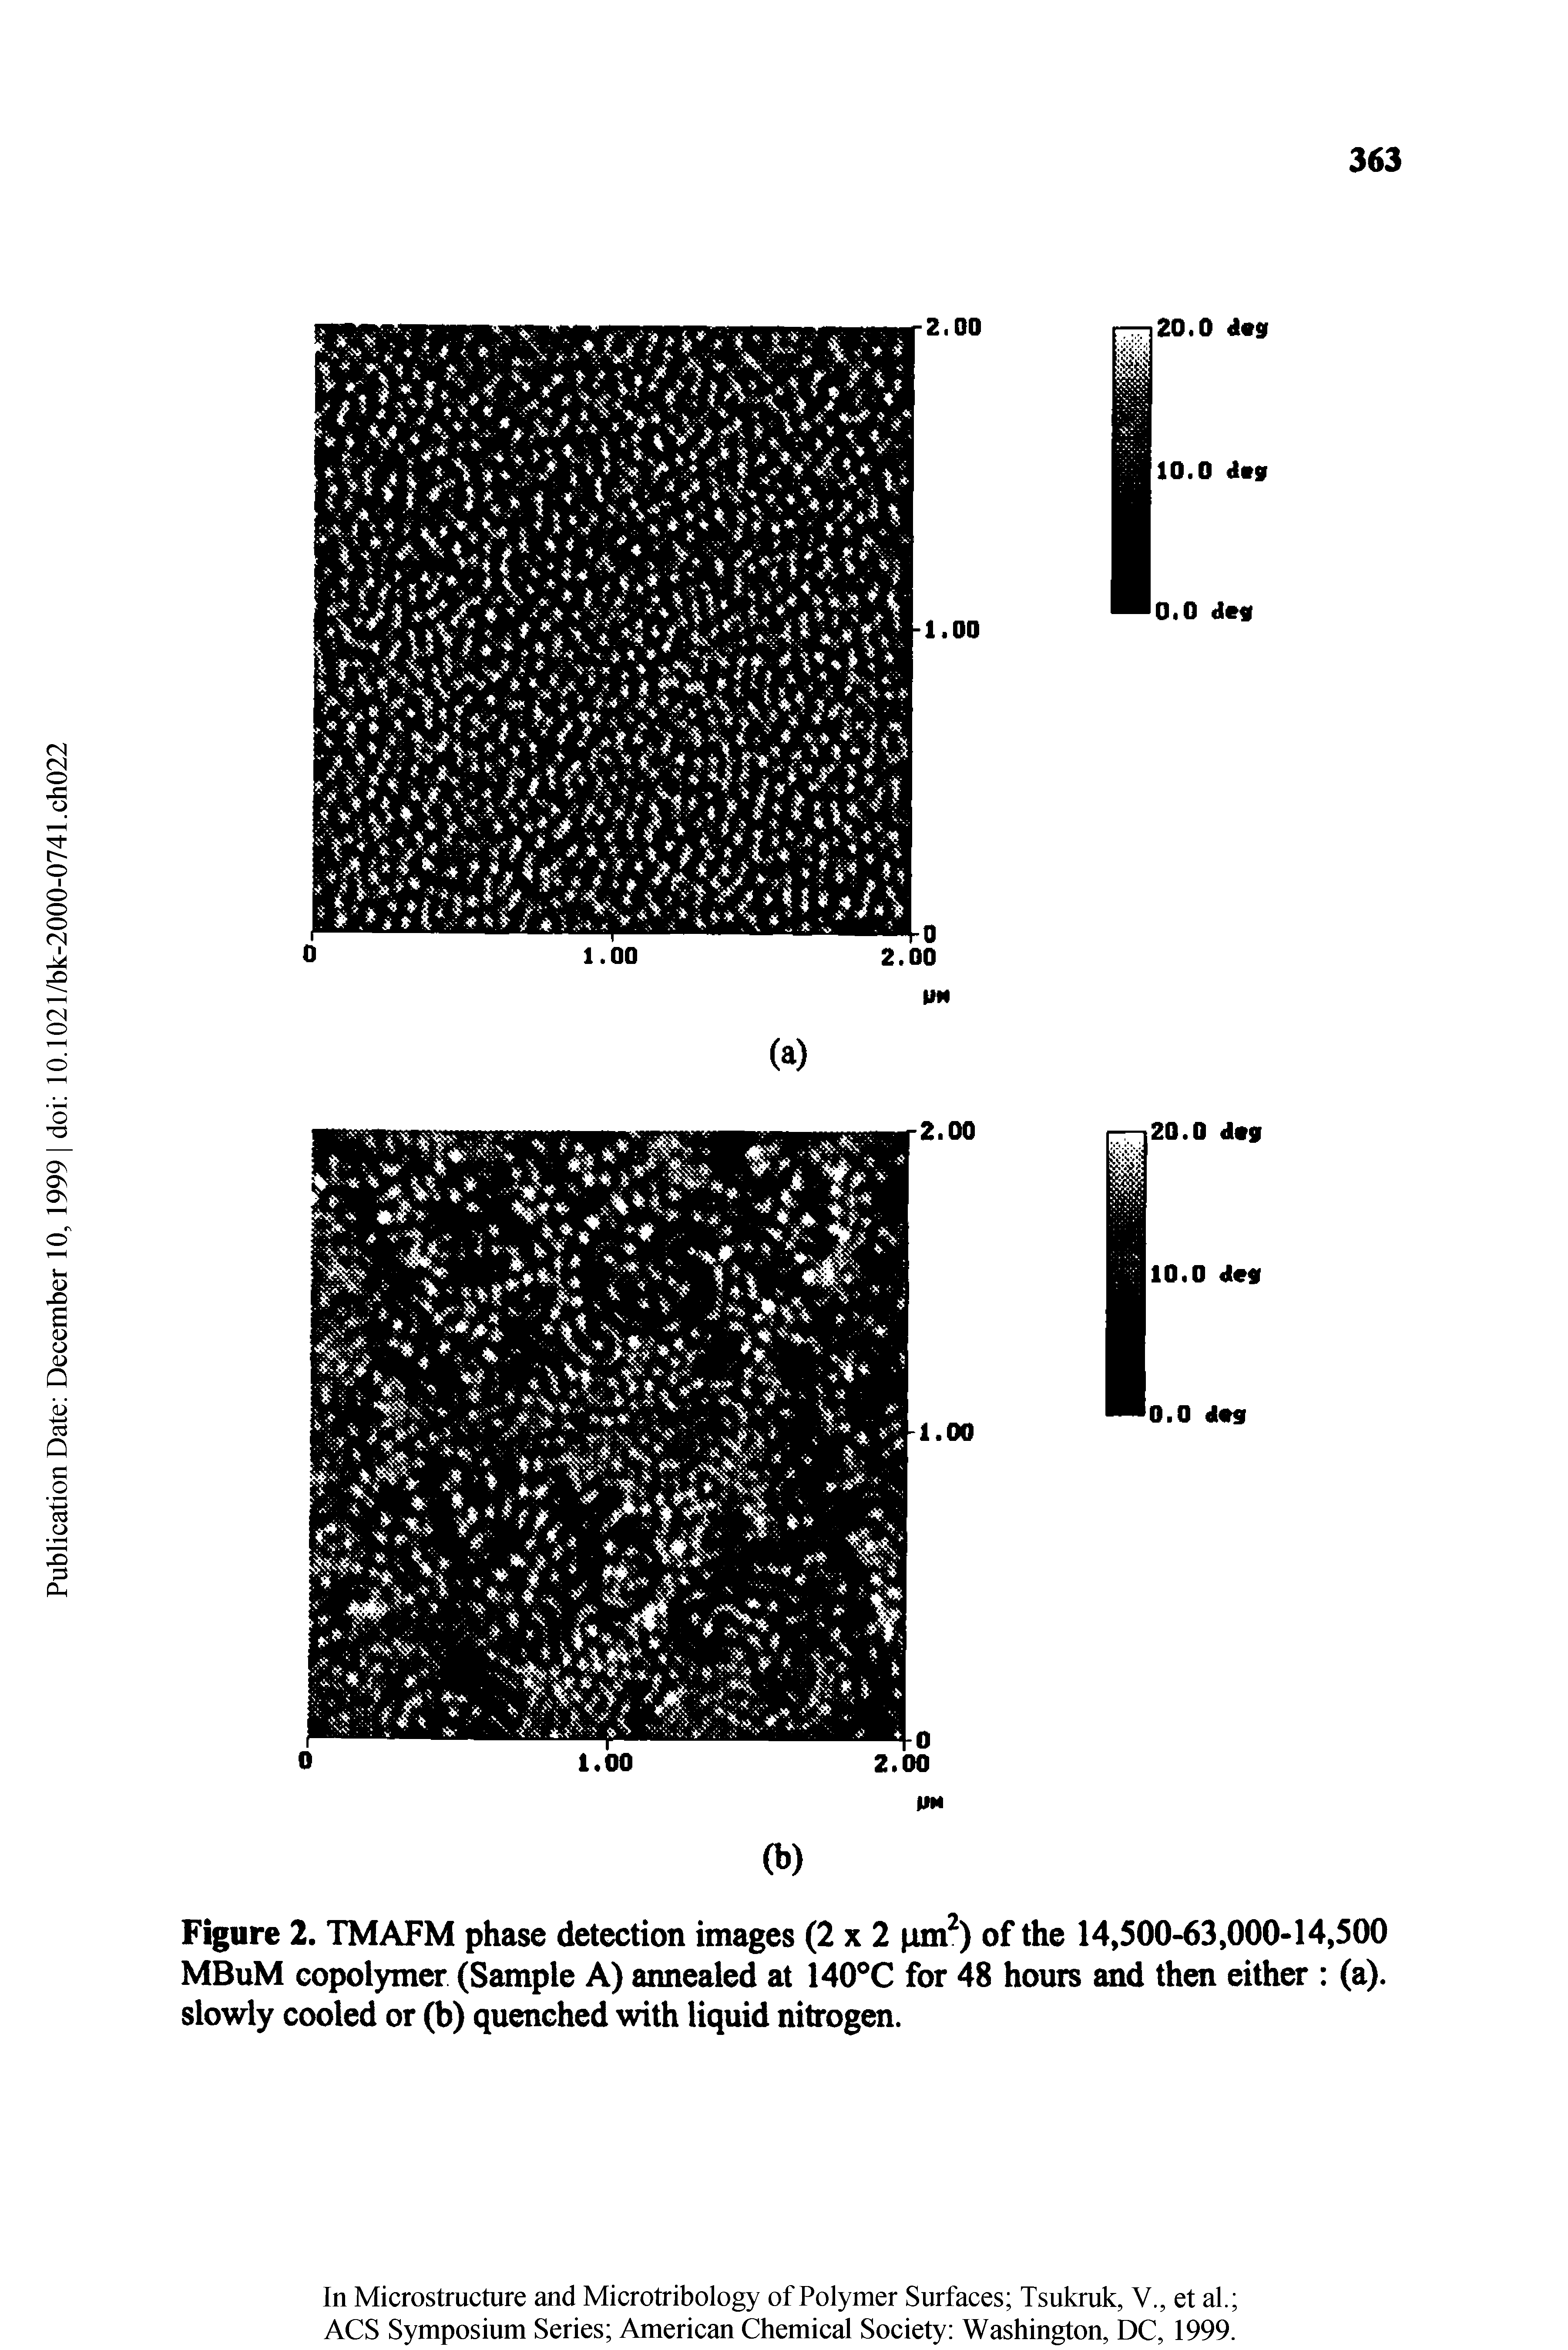 Figure 2. TMAFM phase detection images (2x2 pm ) of the 14,500-63,000-14,500 MBuM copolymer (Sample A) aimealed at 140 C for 48 hours and then either (a), slowly cooled or (b) quenched with liquid nitrogen.